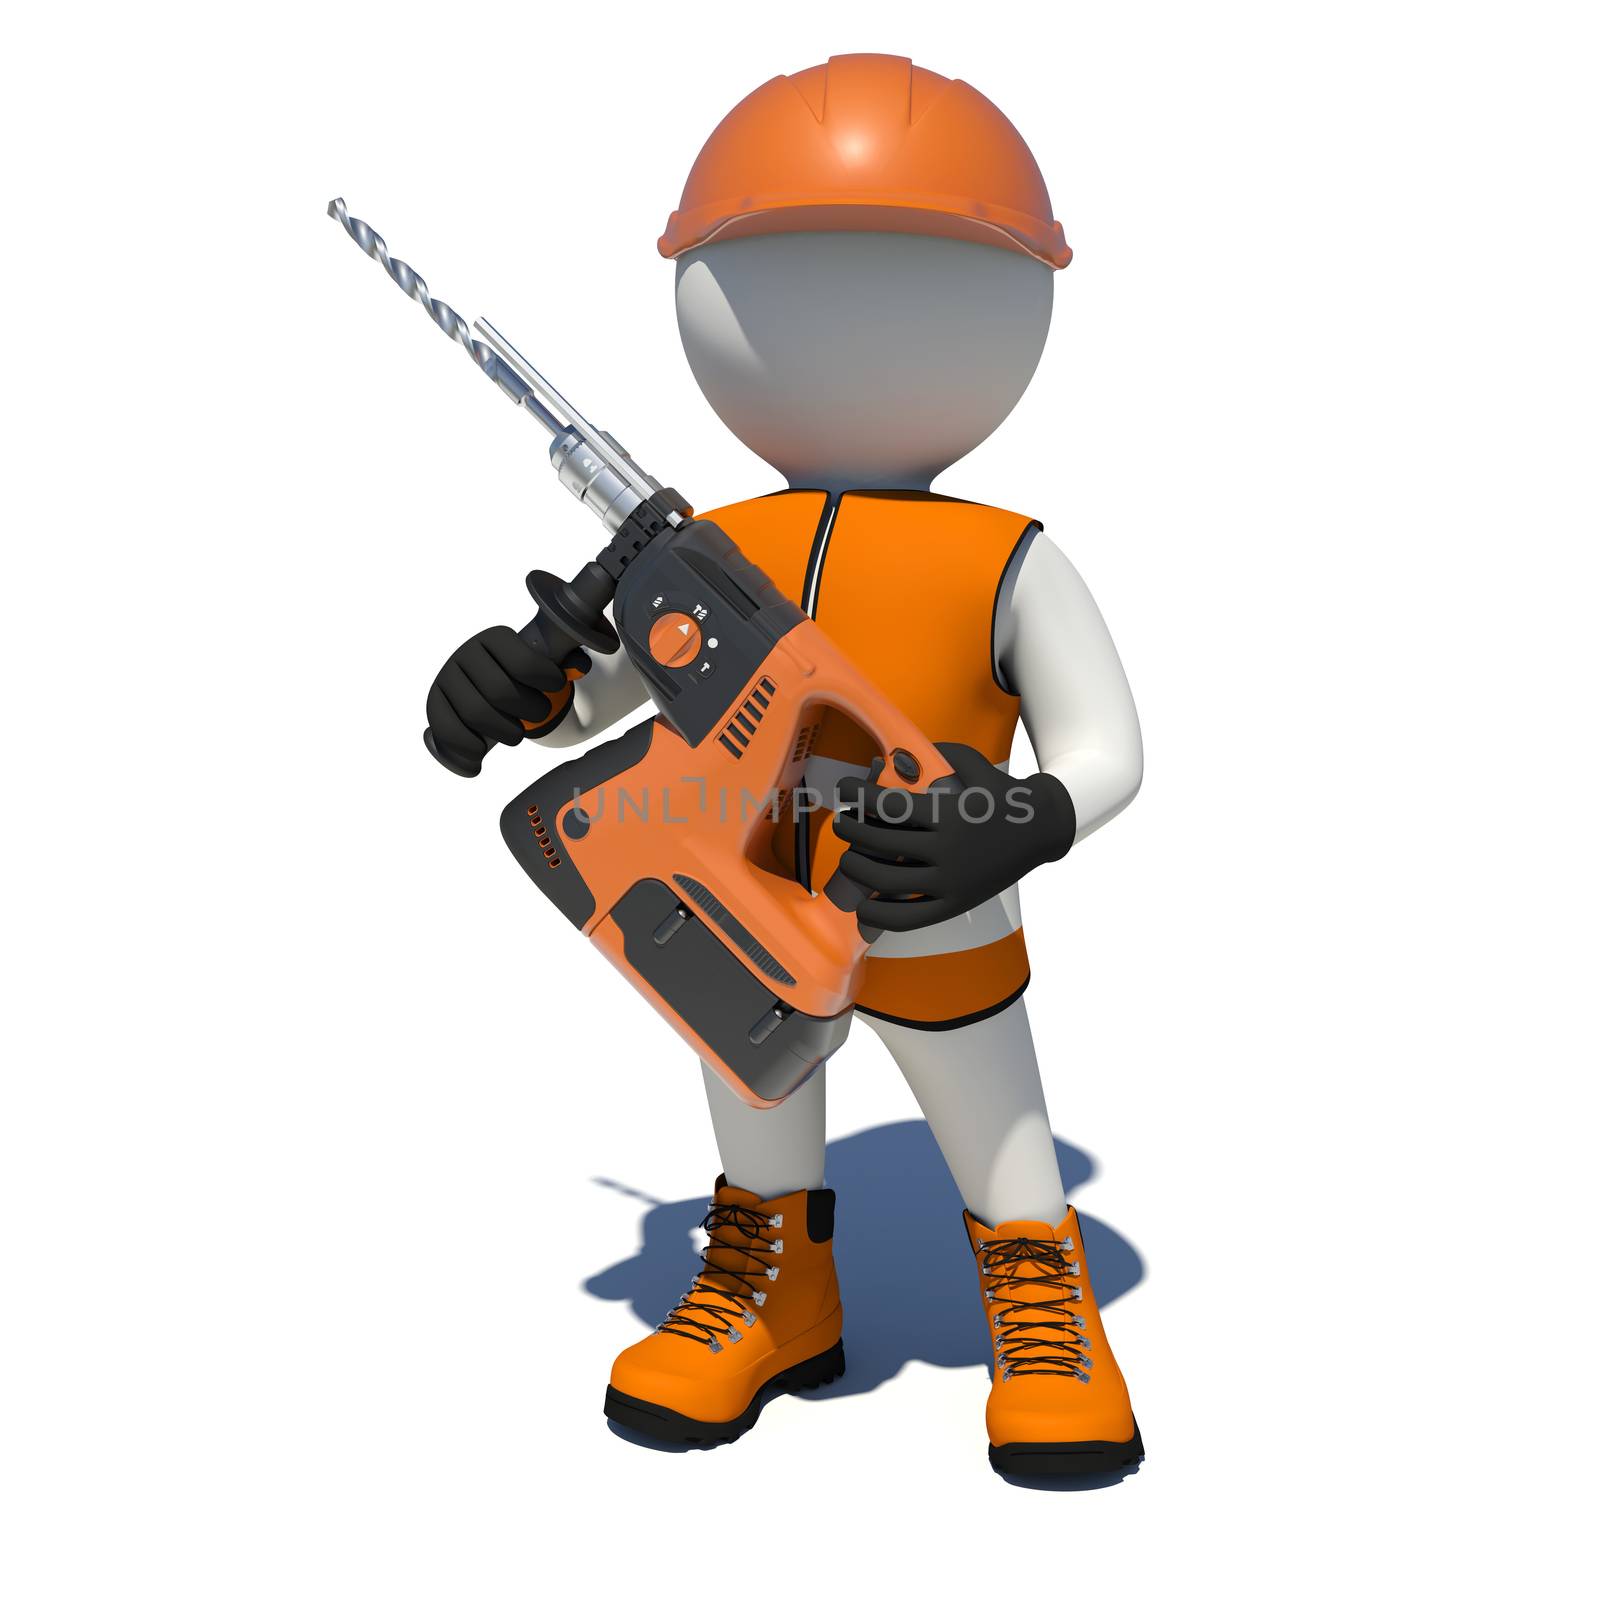 Worker in vest, shoes and helmet holding electric perforator. Front view. Isolated render on white background